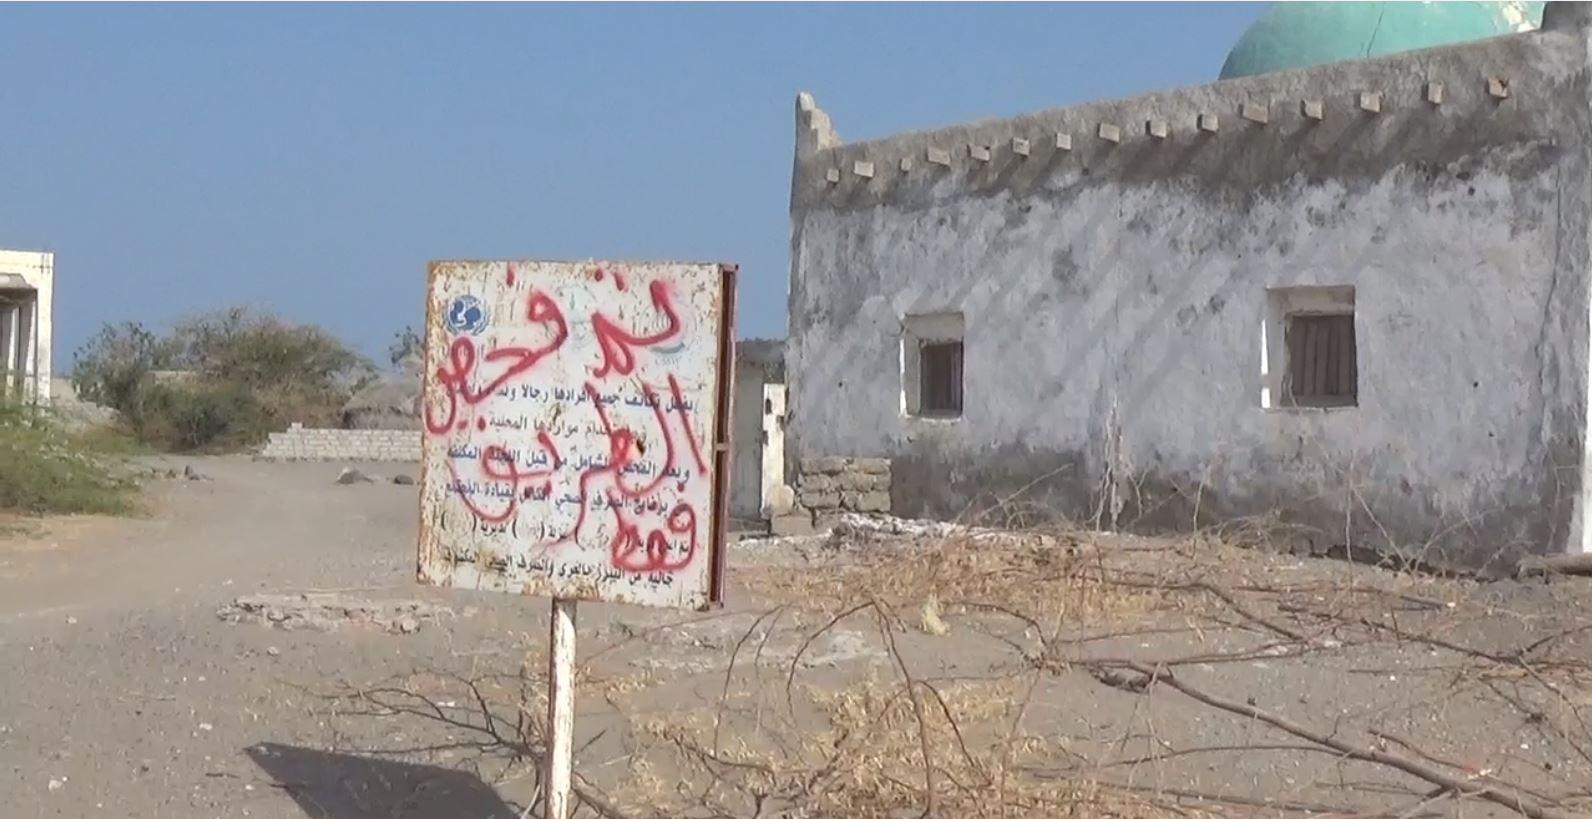 A sign saying “only the road has been checked,” in the village of Ruwais, Mokha district. © 2018 Private